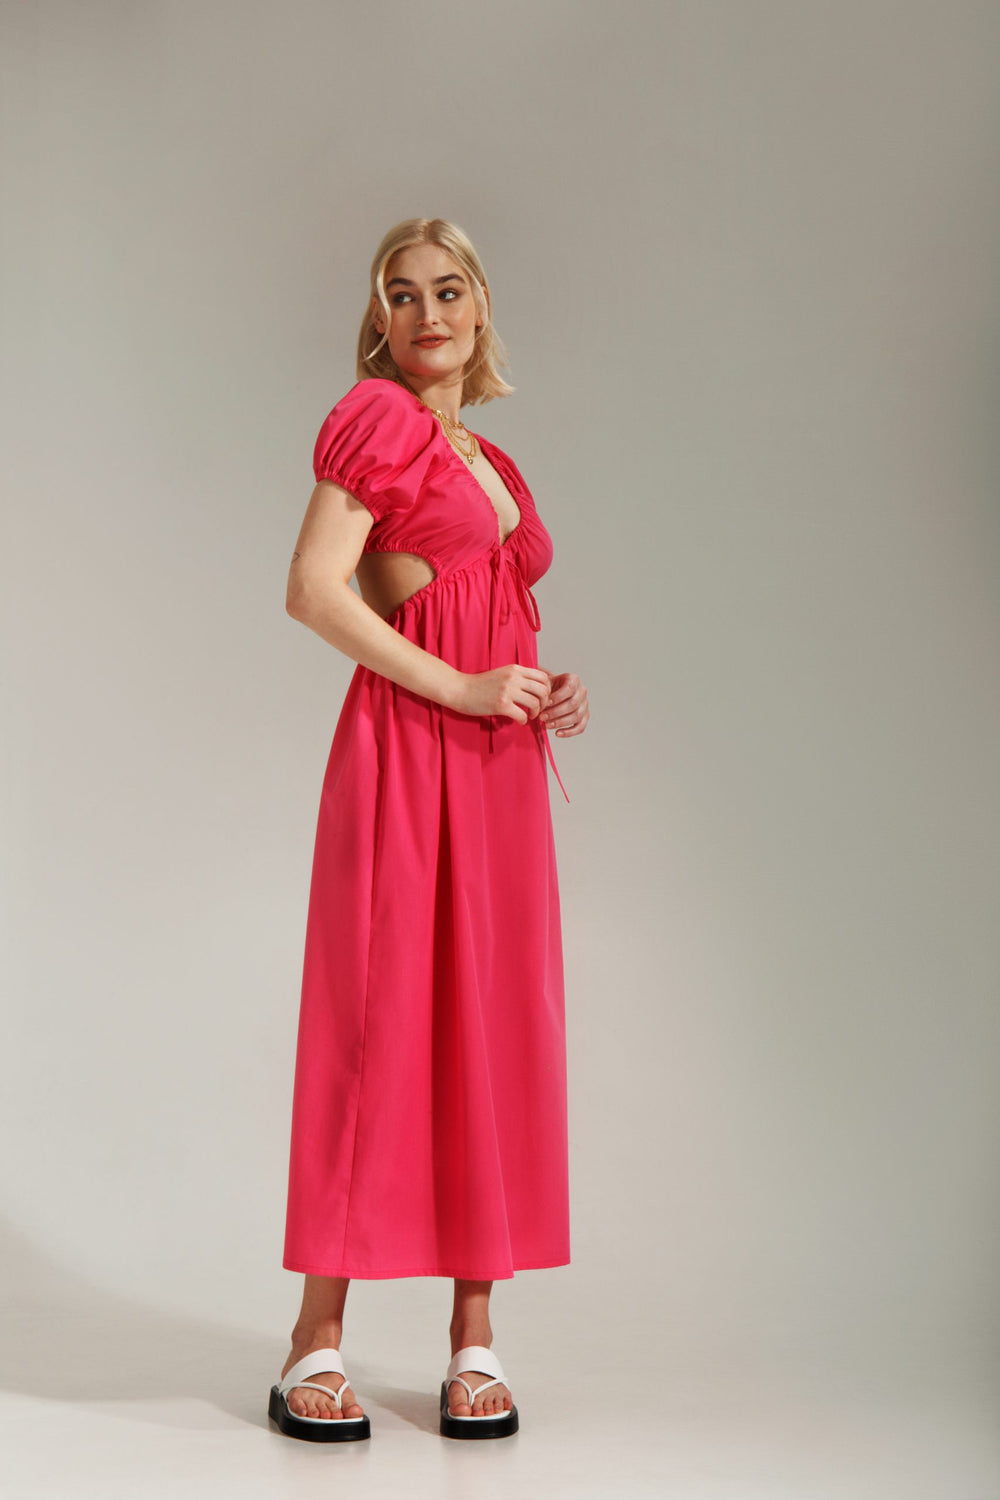 Woman wearing the Oona Dress sewing pattern from Vikisews on The Fold Line. A dress pattern made in sateen, poplin, linen, eyelet, opaque cotton shirting or viscose fabrics, featuring a semi-fit A-line silhouette, partially attached front bodice creating 